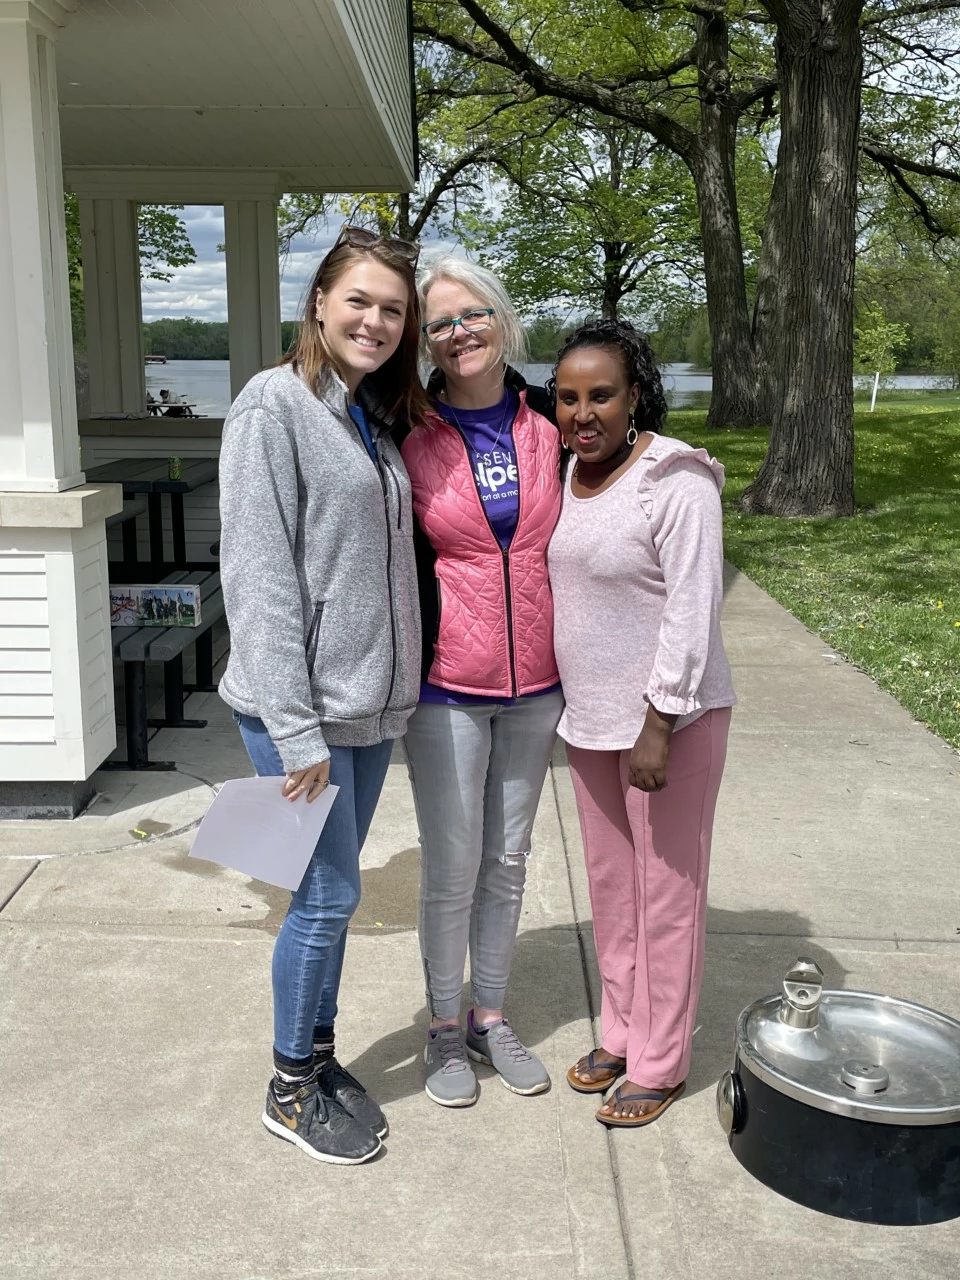 Back in May we hosted a SH Field Day. We had a great time getting to know our caregivers outside of the office! We set up bags, water balloons, and music.